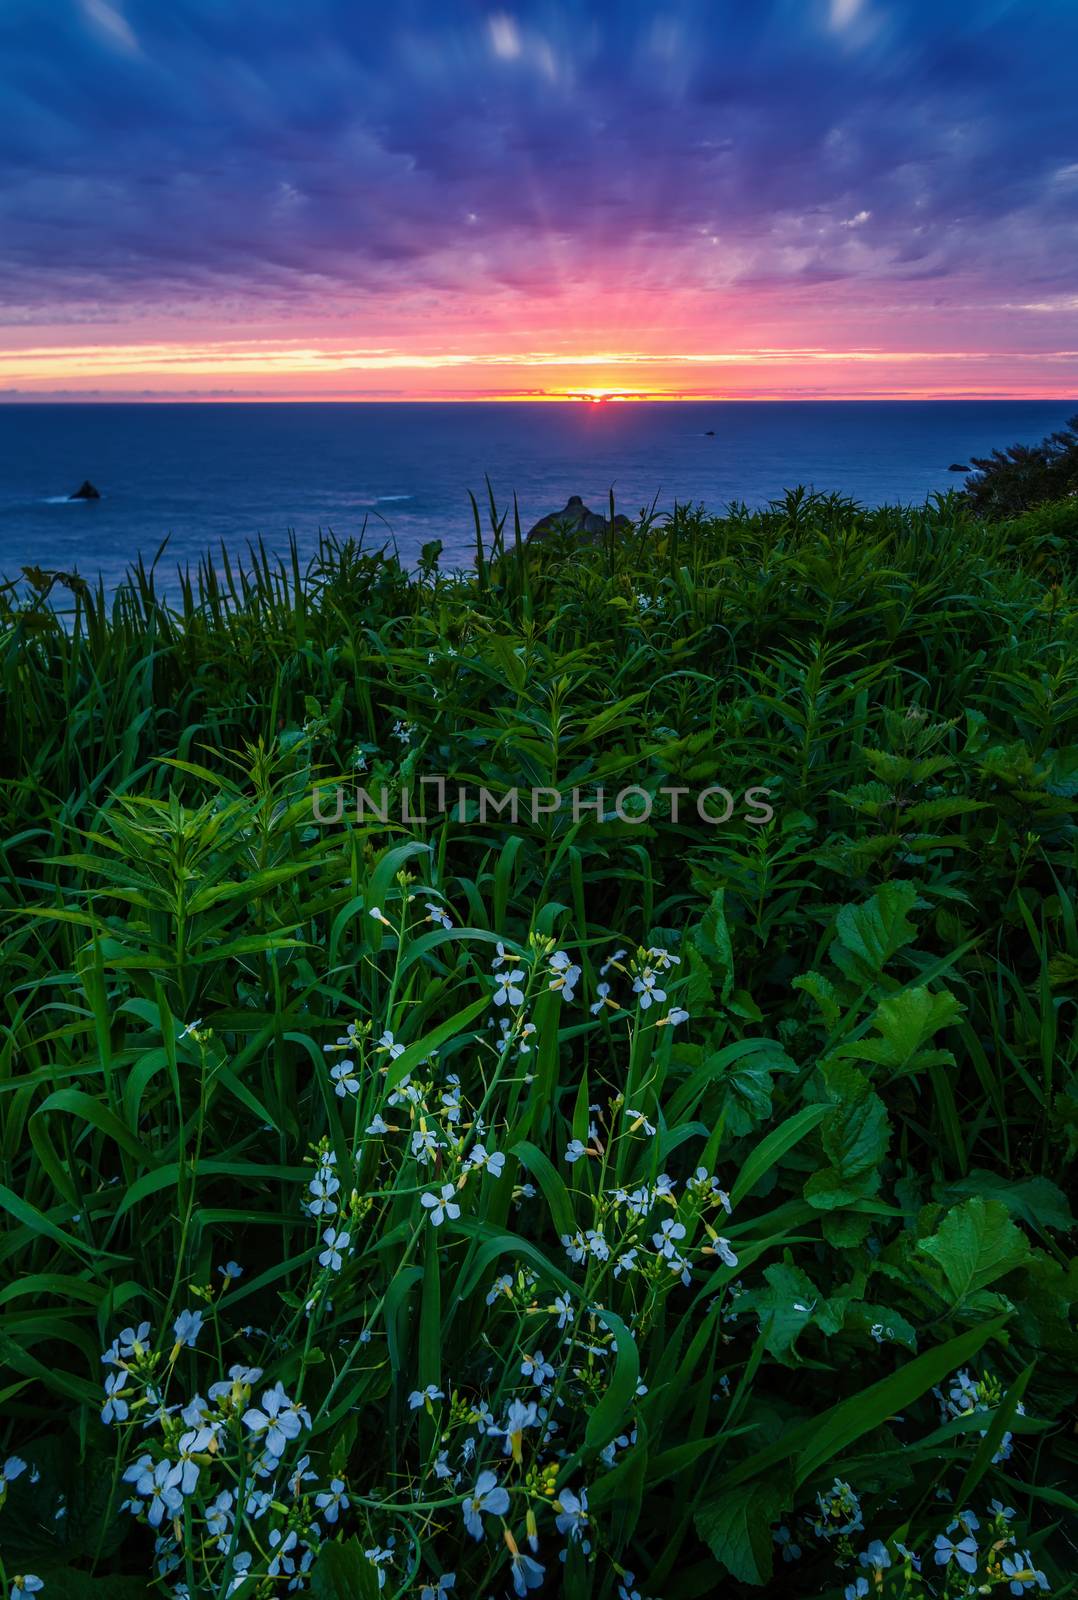 Flowers in the foreground of a beautiful sunset at a rocky beach in Northern California.